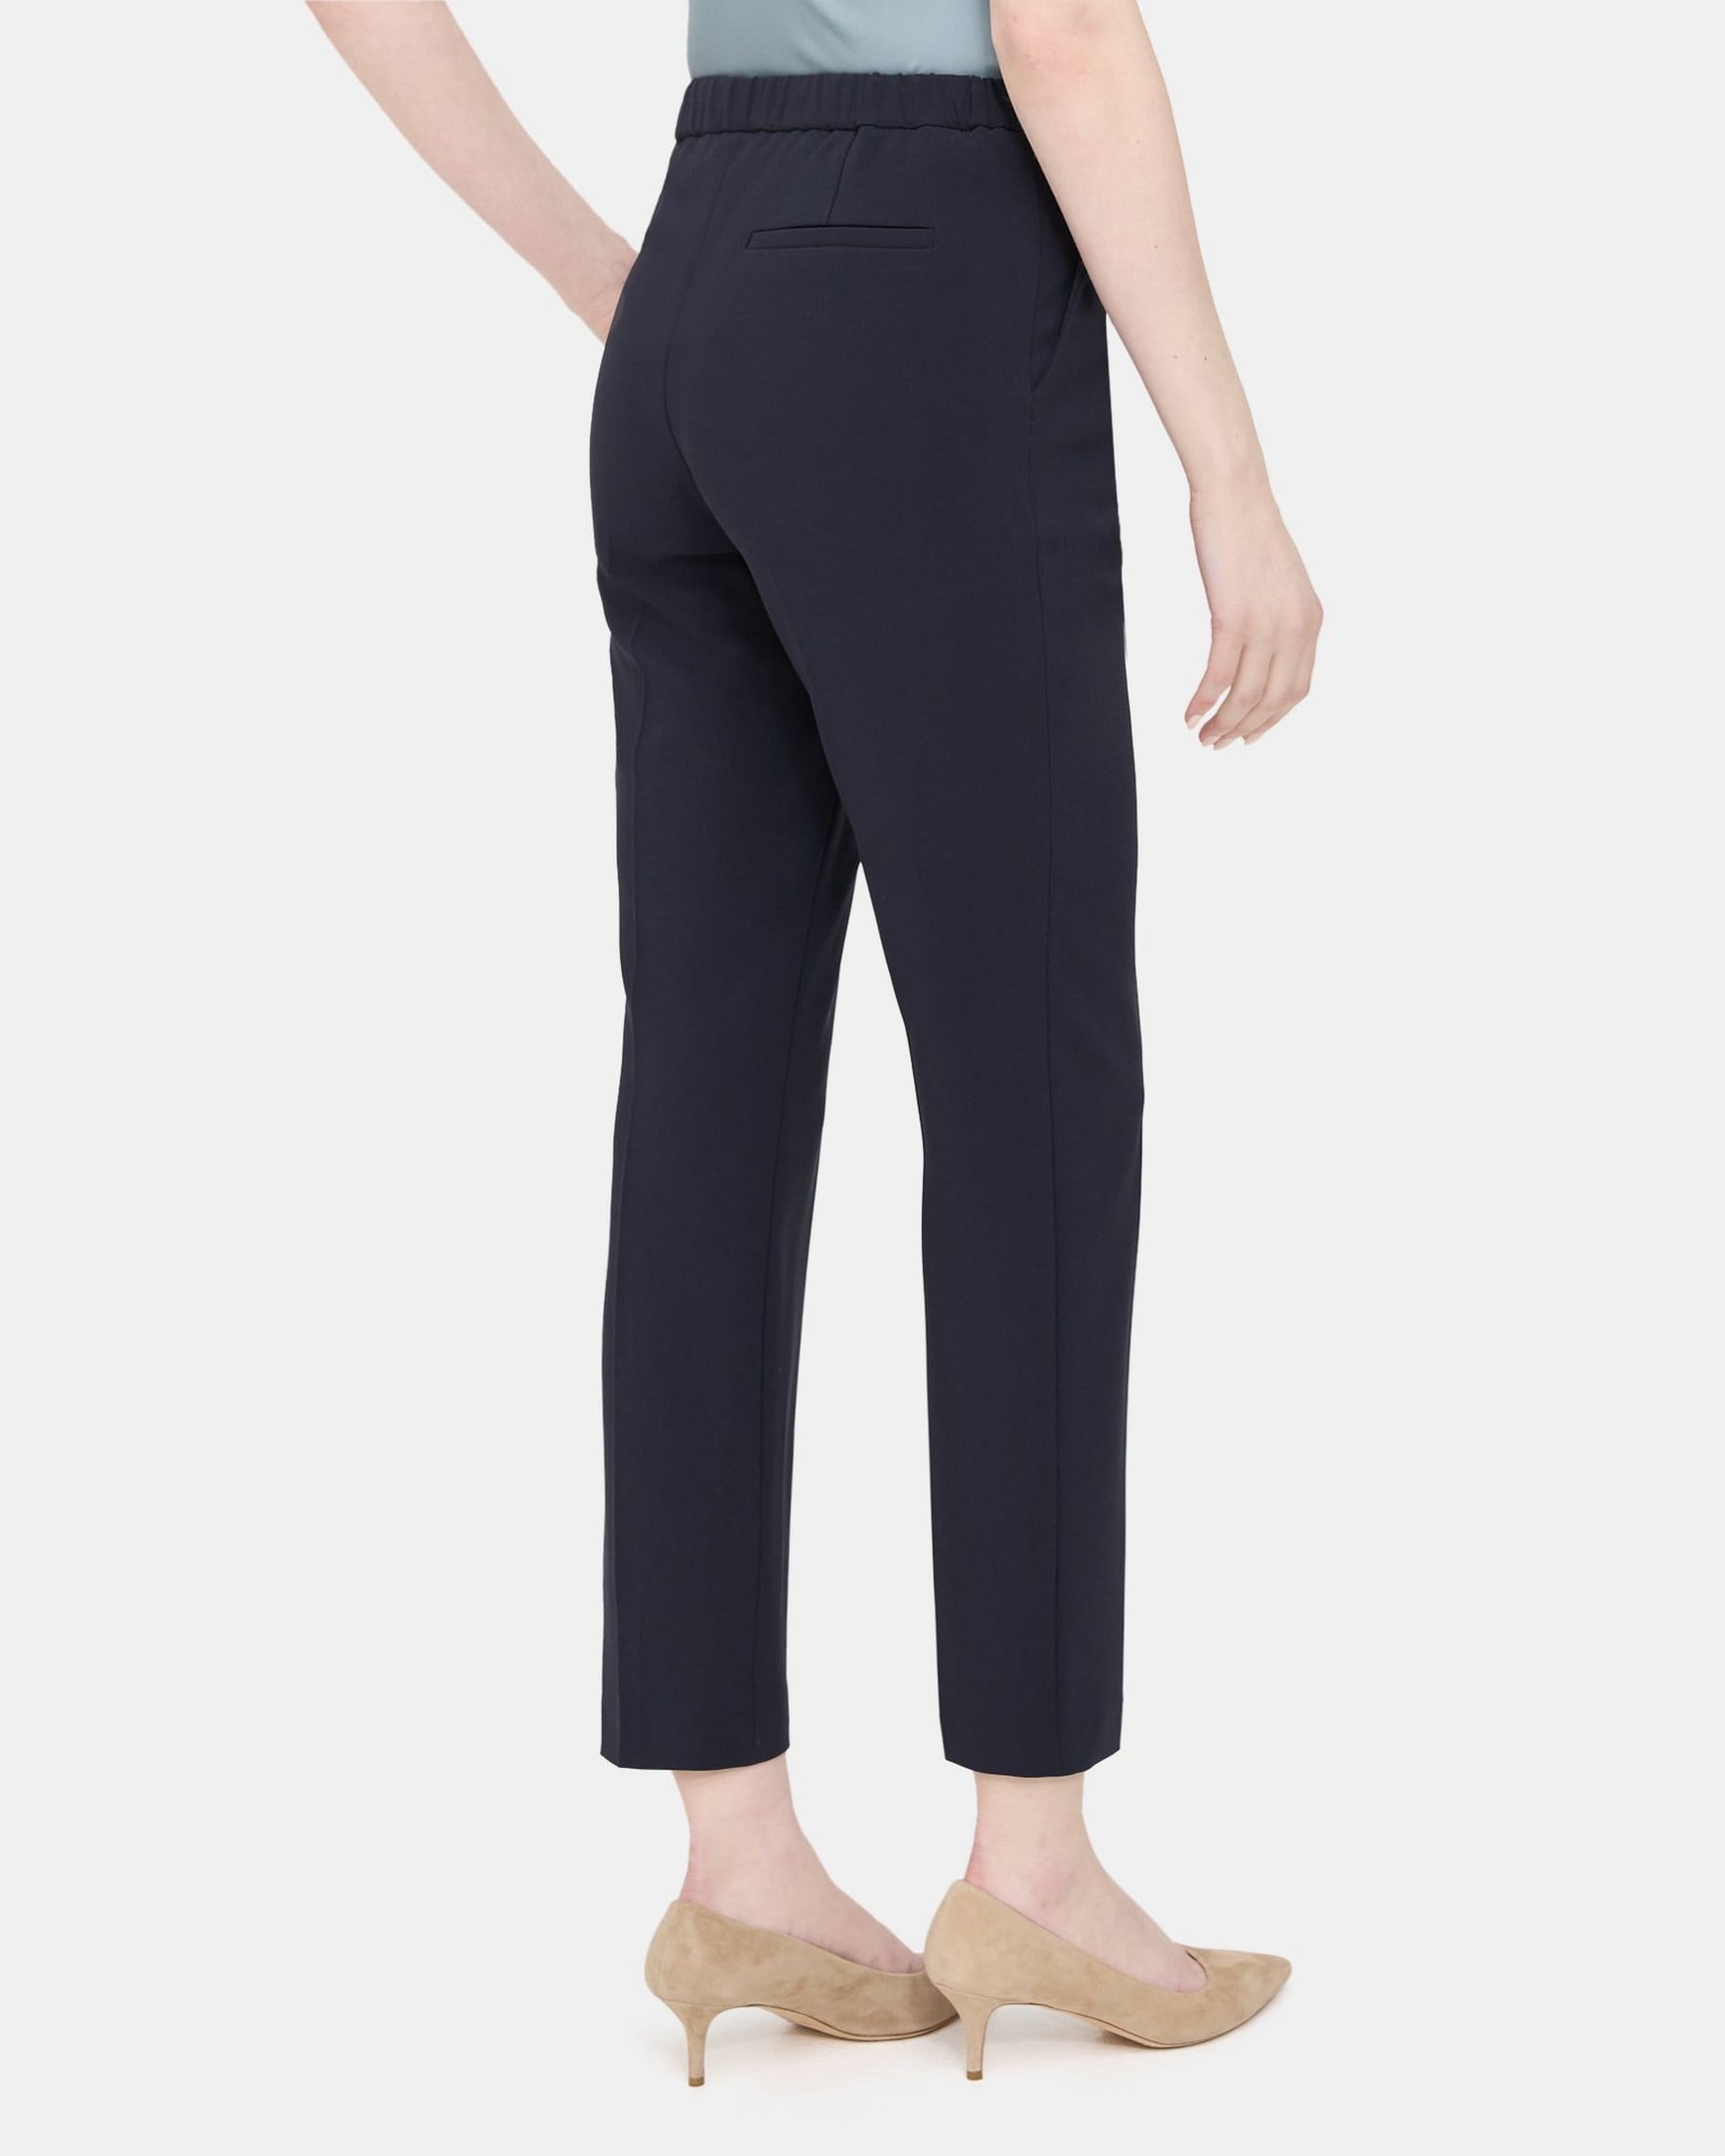 Slim Cropped Pull-On Pant in Crepe